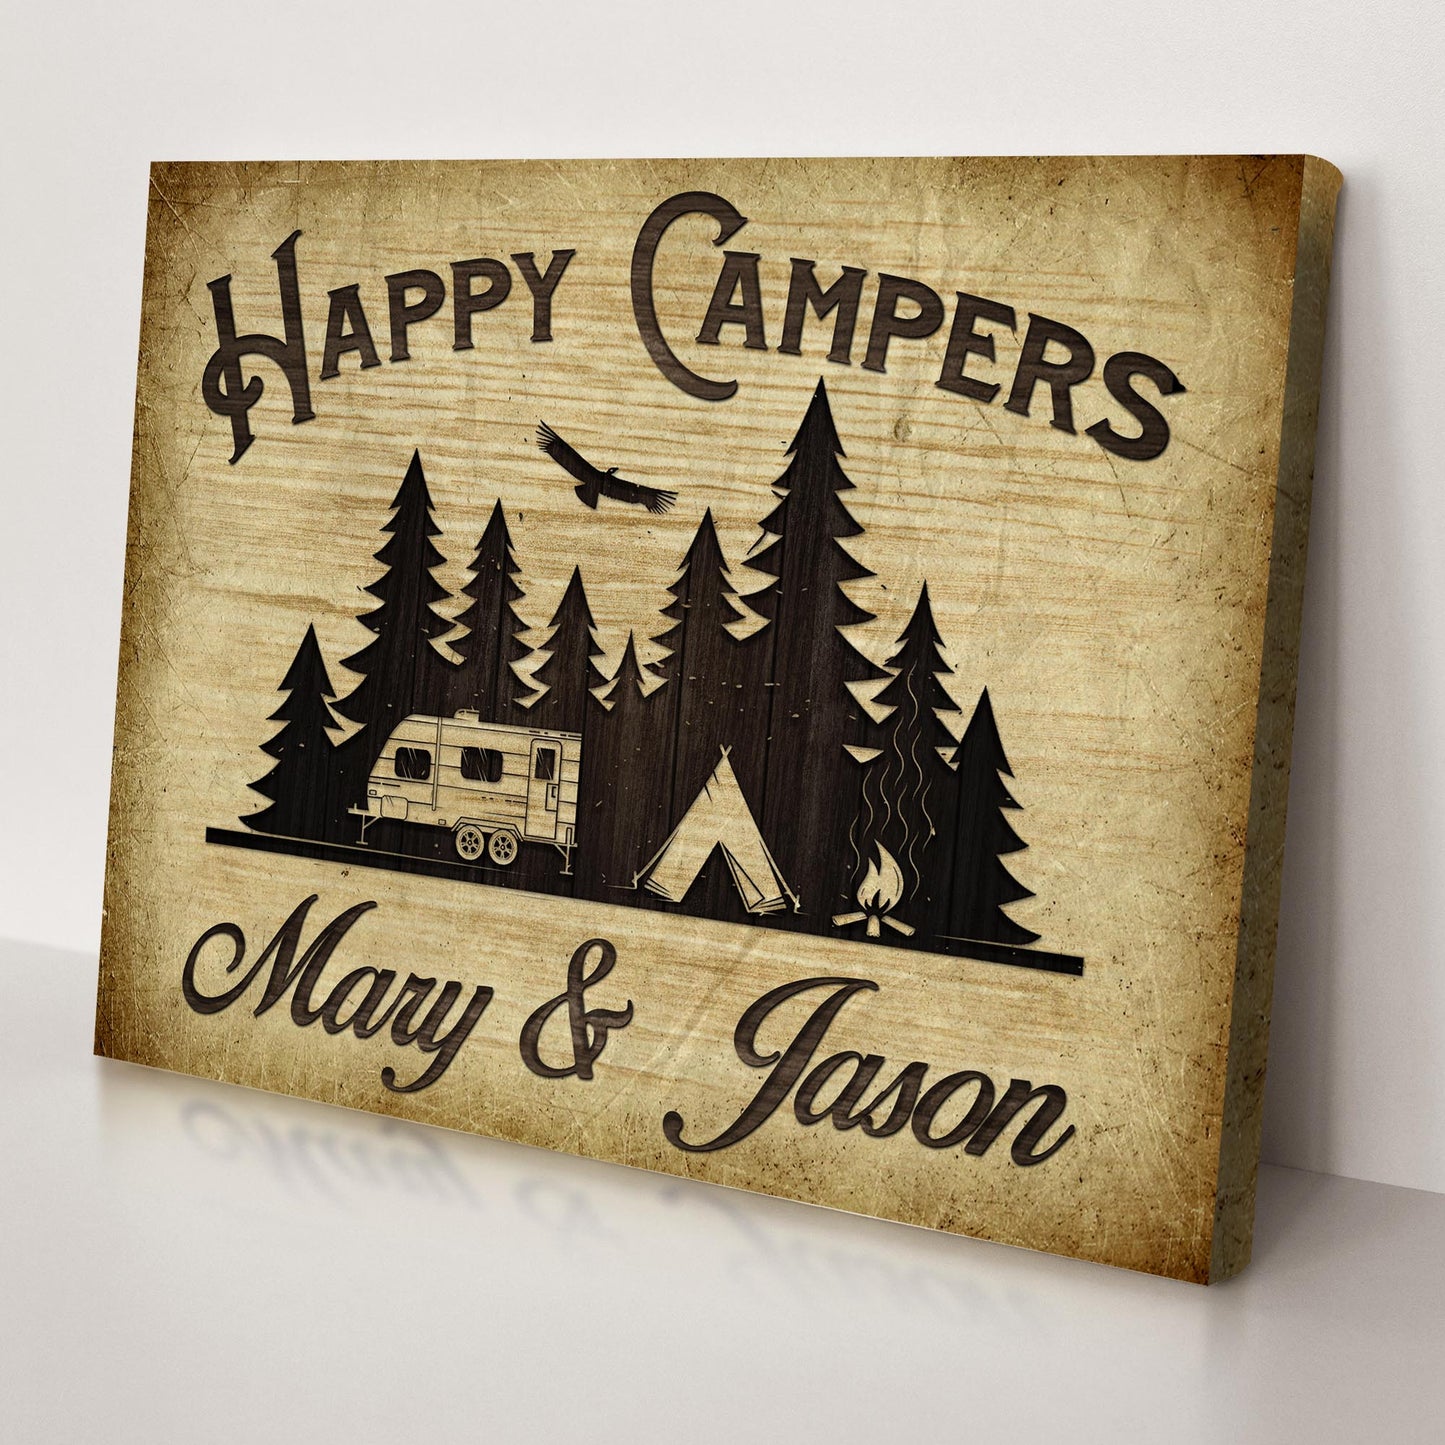 Happy Campers Trailer Sign - Image by Tailored Canvases